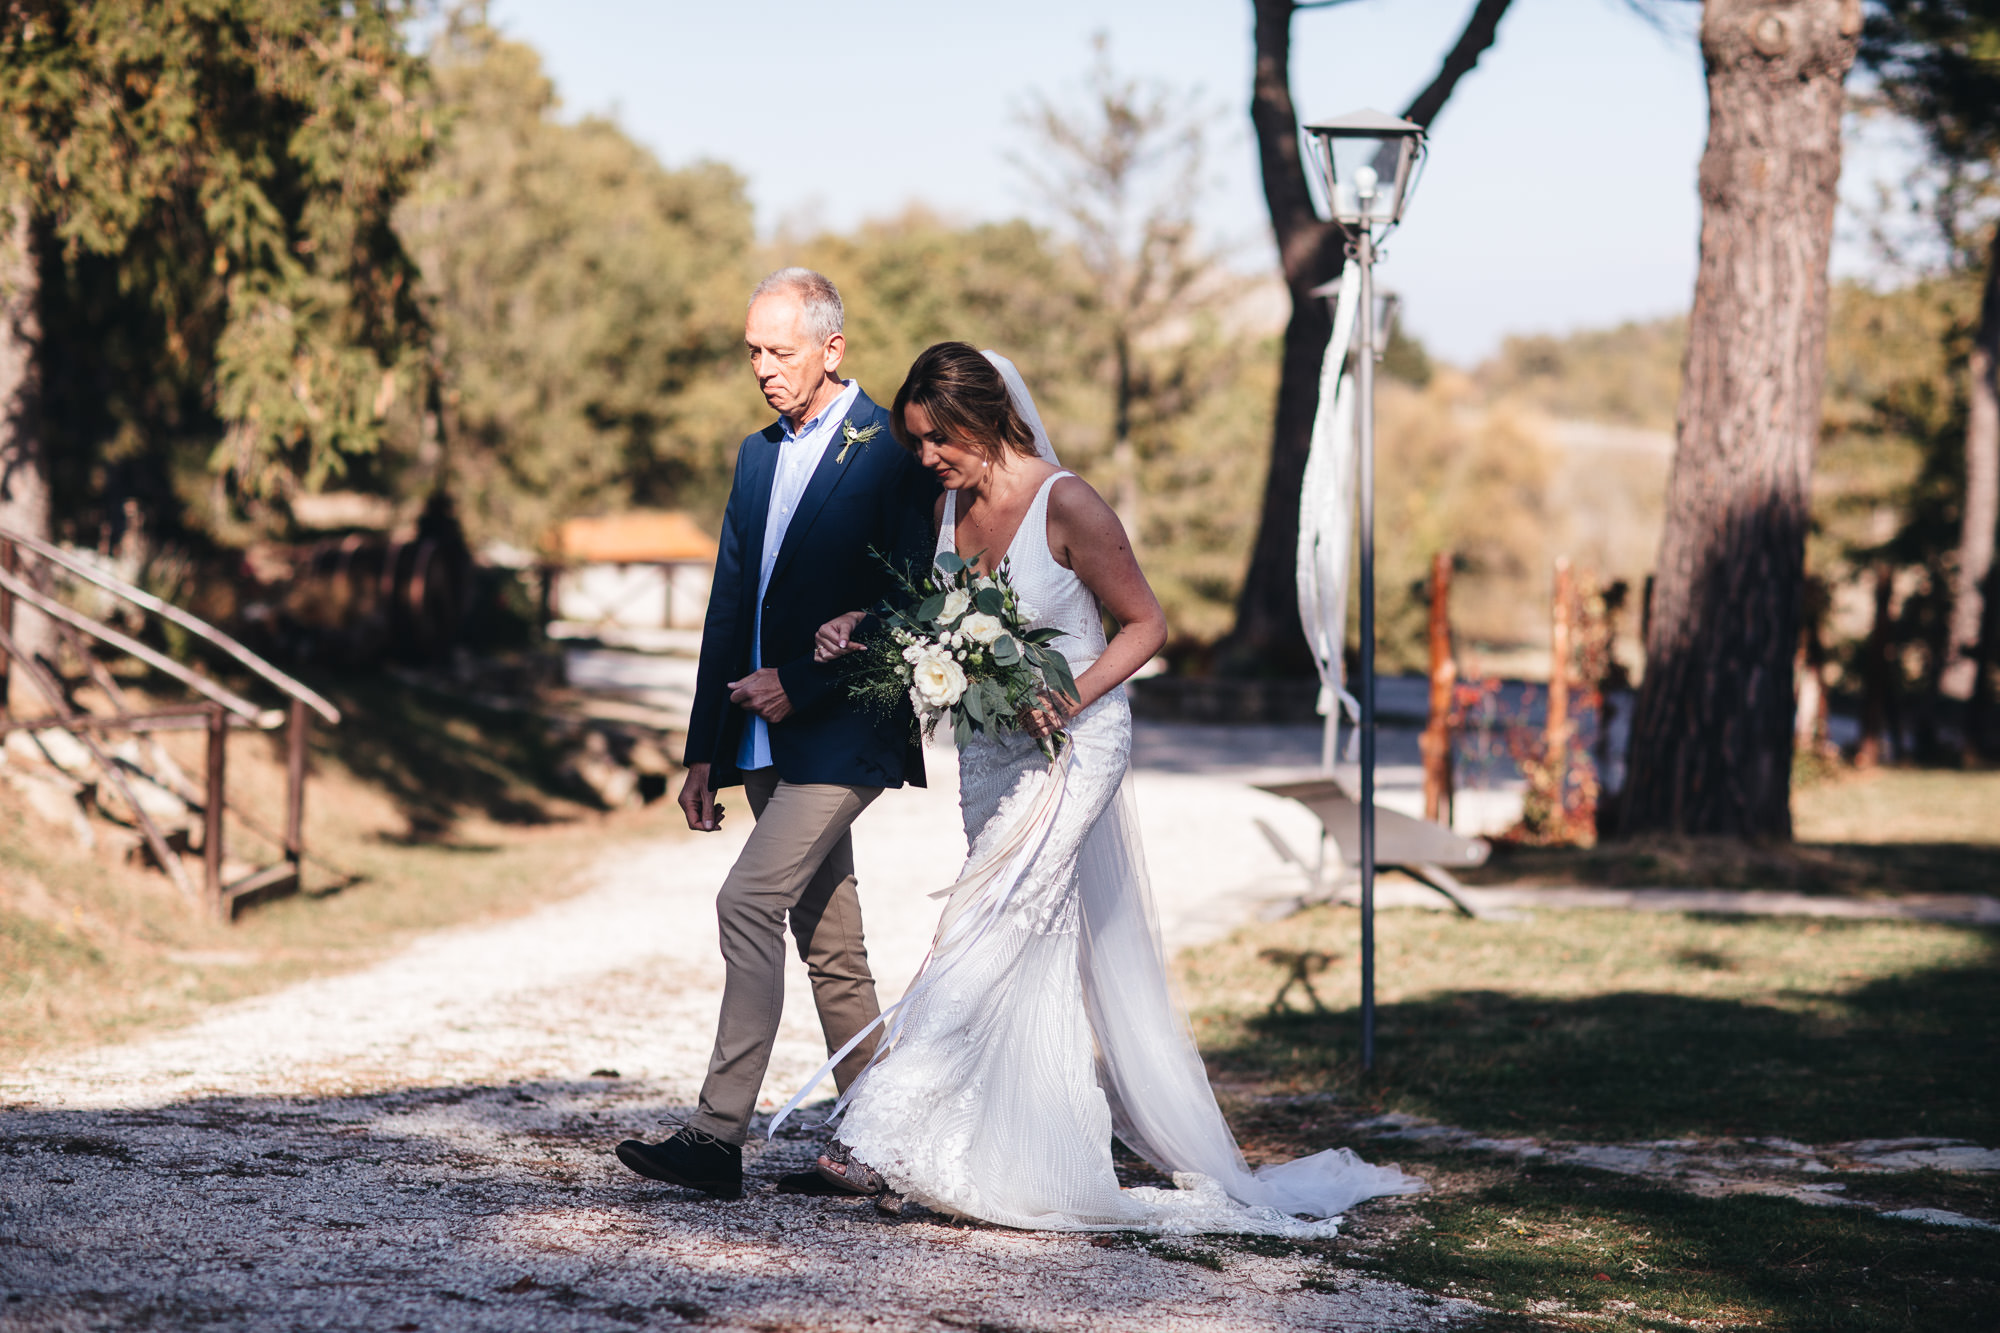 brides walks to ceremony with father